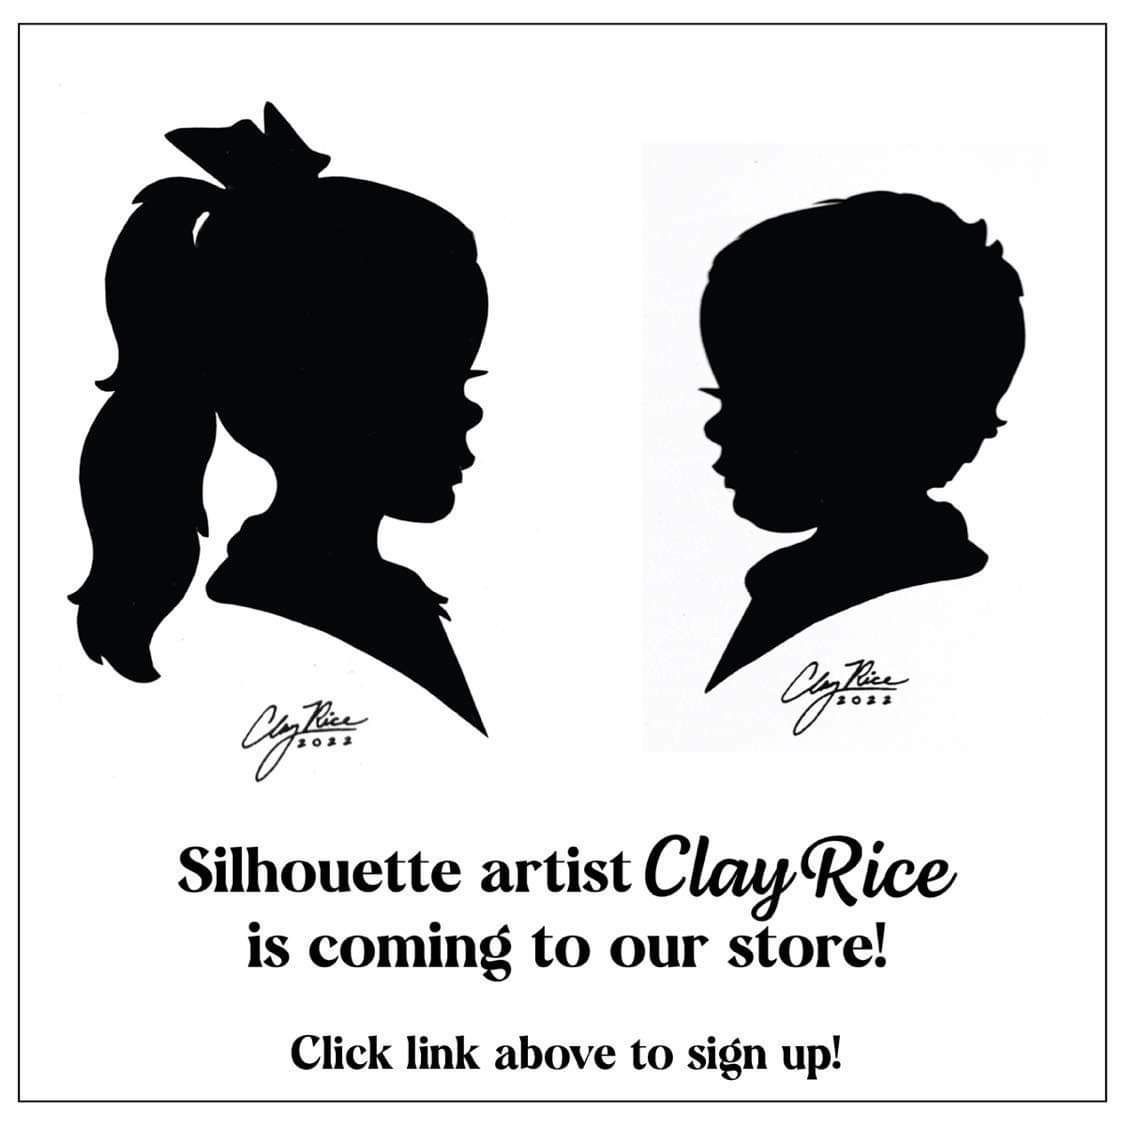 Silhouettes by Clay Rice at Peek-A-Boo Grins